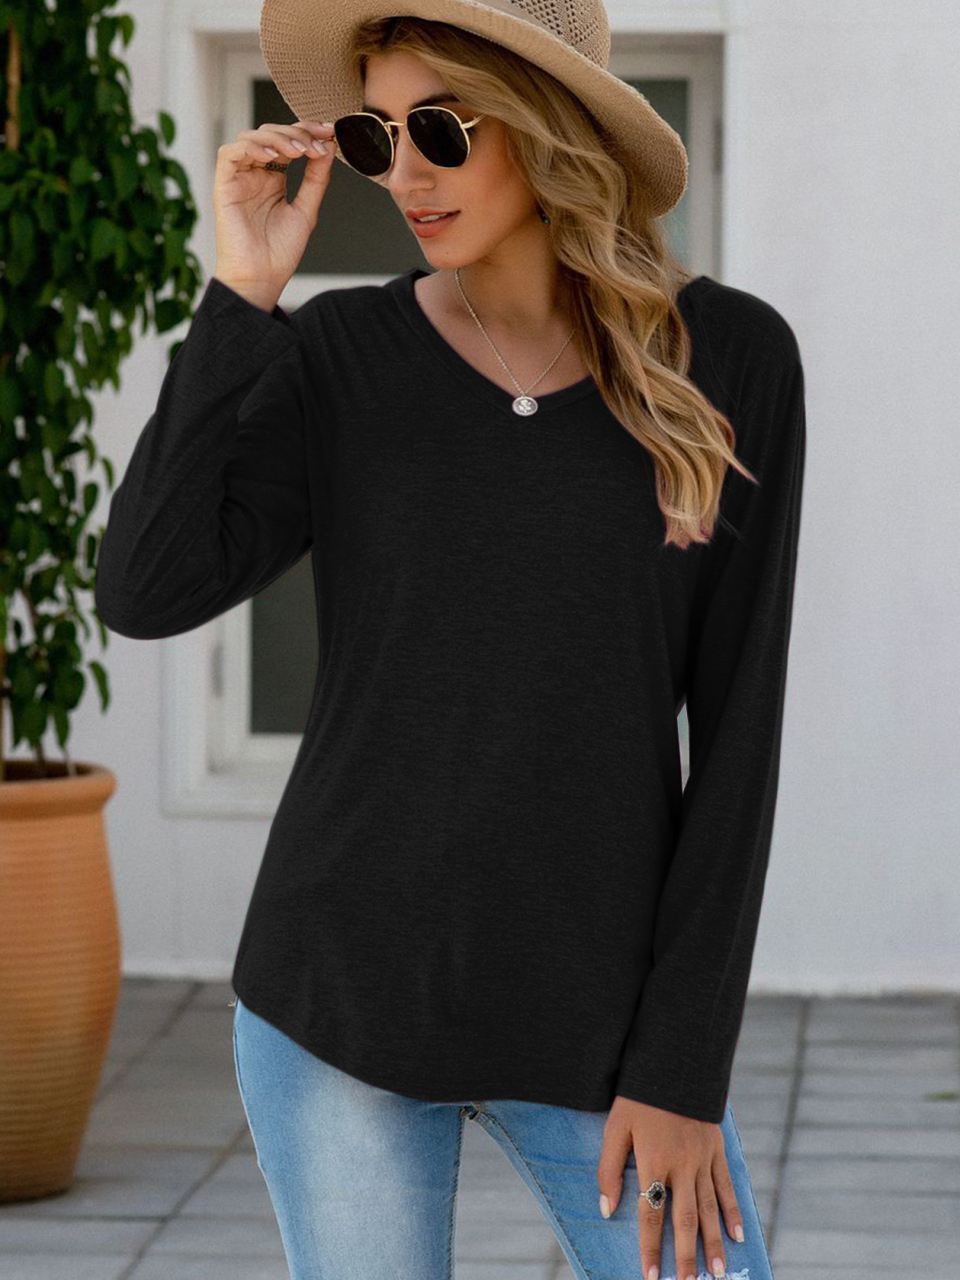 Women's Fashion Casual Solid Color V Neck Tops